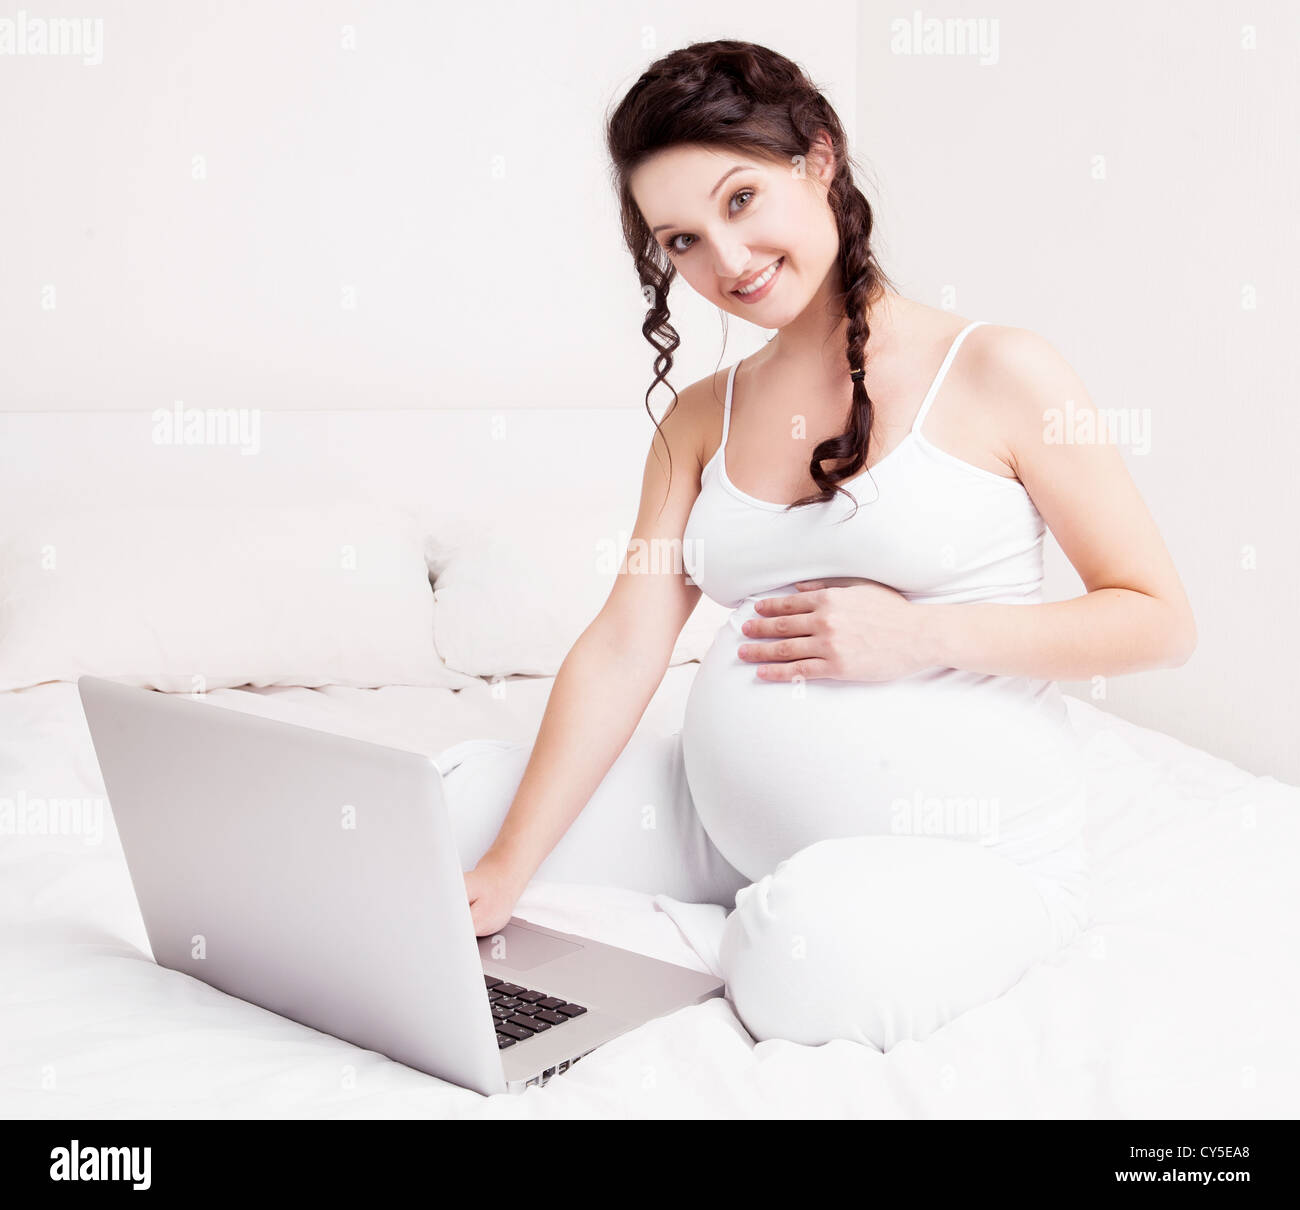 Pregnant Brunette Woman in Pantyhose, Bra and Shoes Stock Image - Image of  beautiful, friend: 242949781